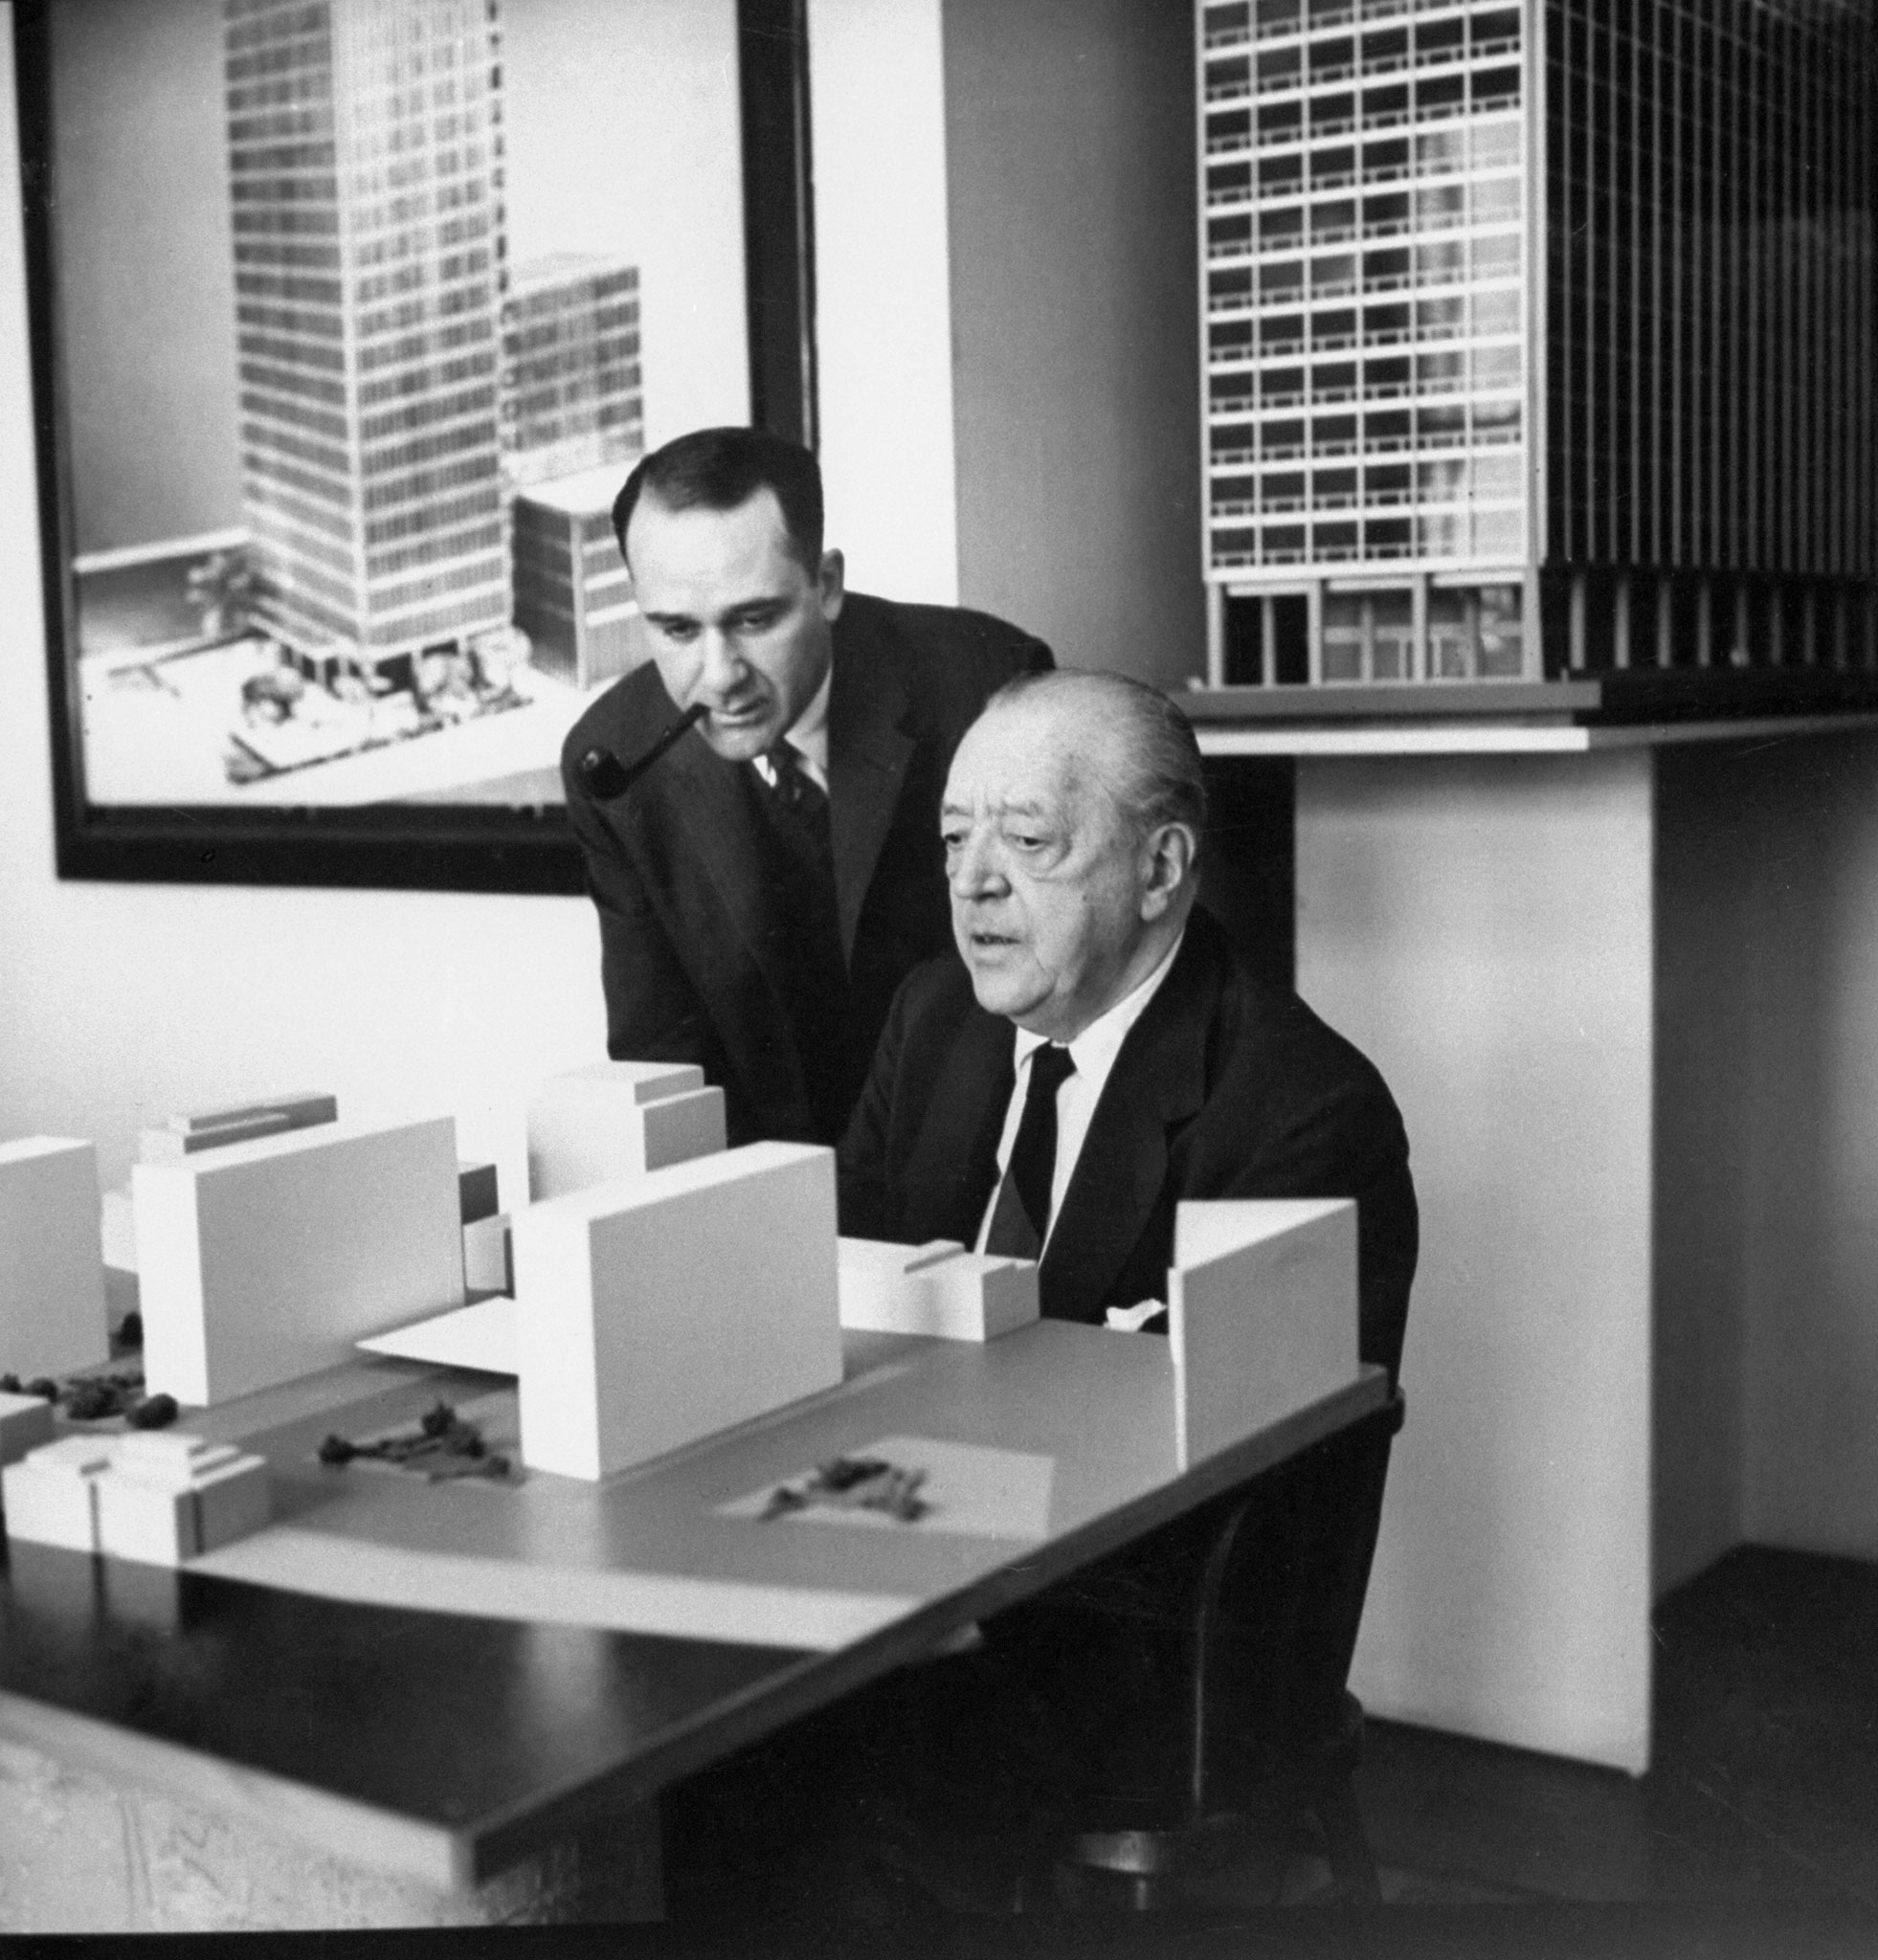 00957887.JPGPlanning new project to remake Battery park, Mies discusses model with Herbert Greenwald, a real estate developer. Greenwald gave Mies his first Chicago apartments commission, now devotes himself to promoting Mies projects